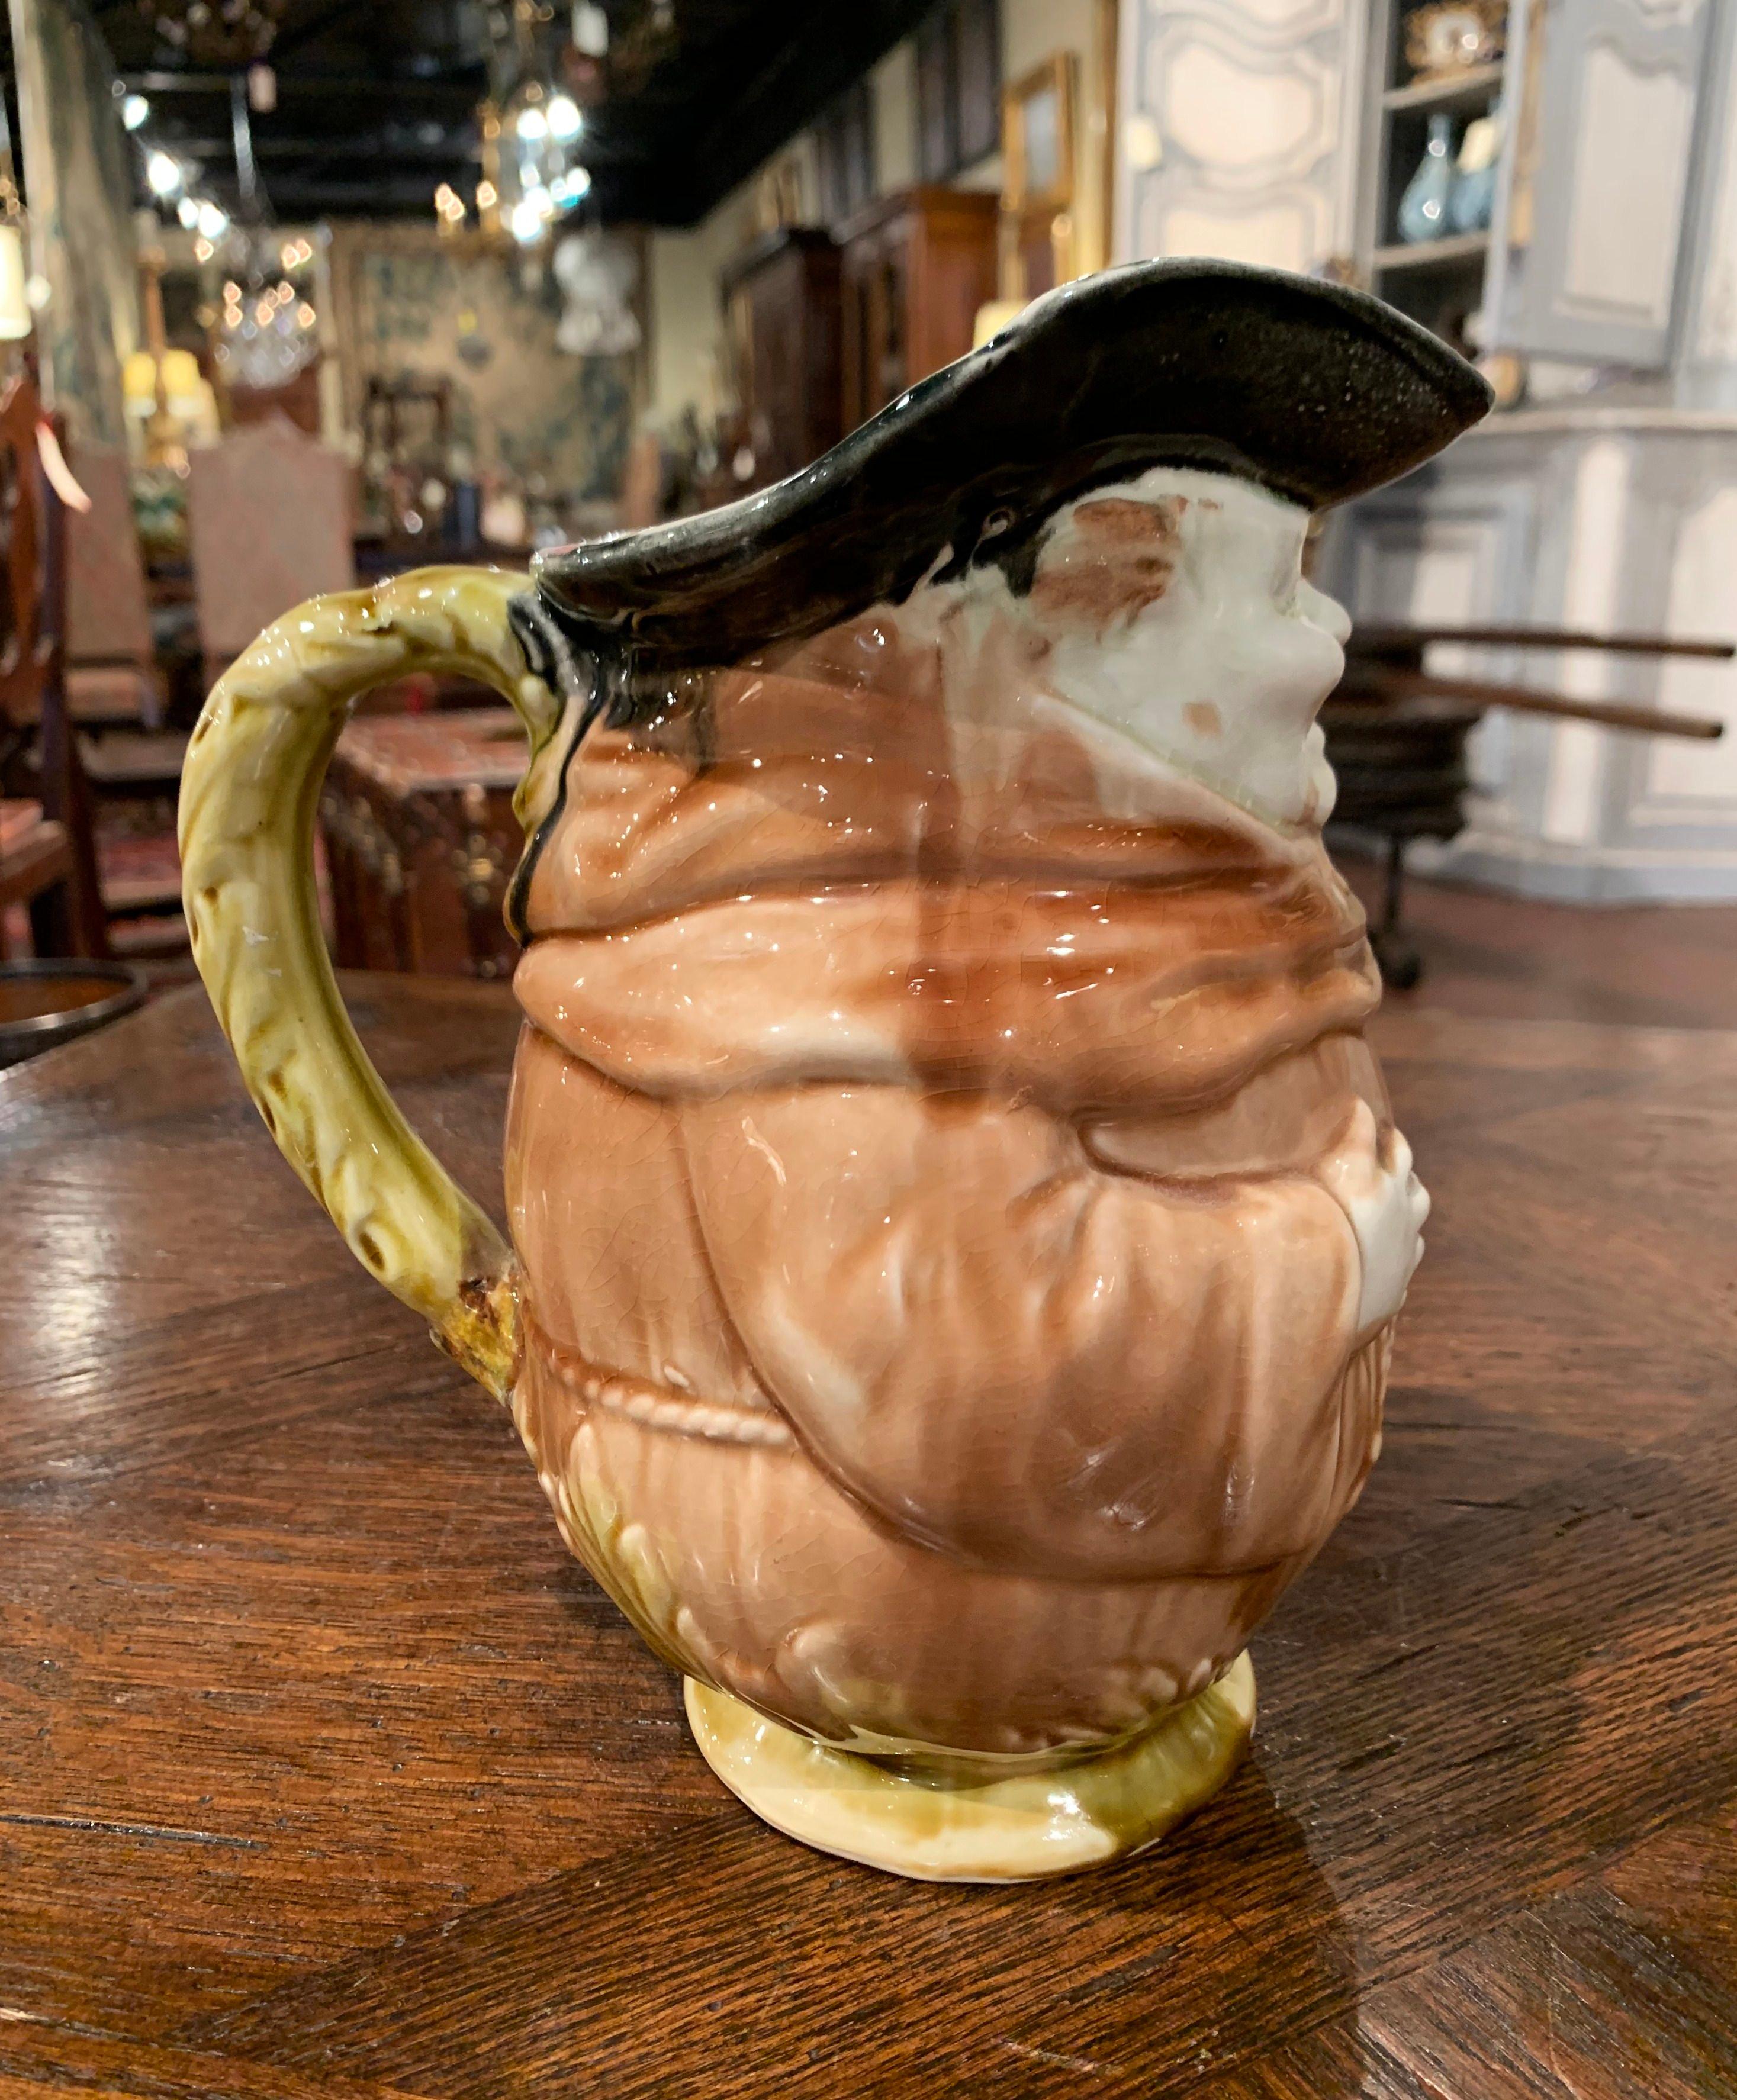 Decorate a wet bar with this charming, sculptural Majolica pitcher; crafted by Onnaing circa 1890, the antique, barbotine jug features a smiling monk with his hands on his chest in a greeting pose. The body and handle are hand painted in a brown